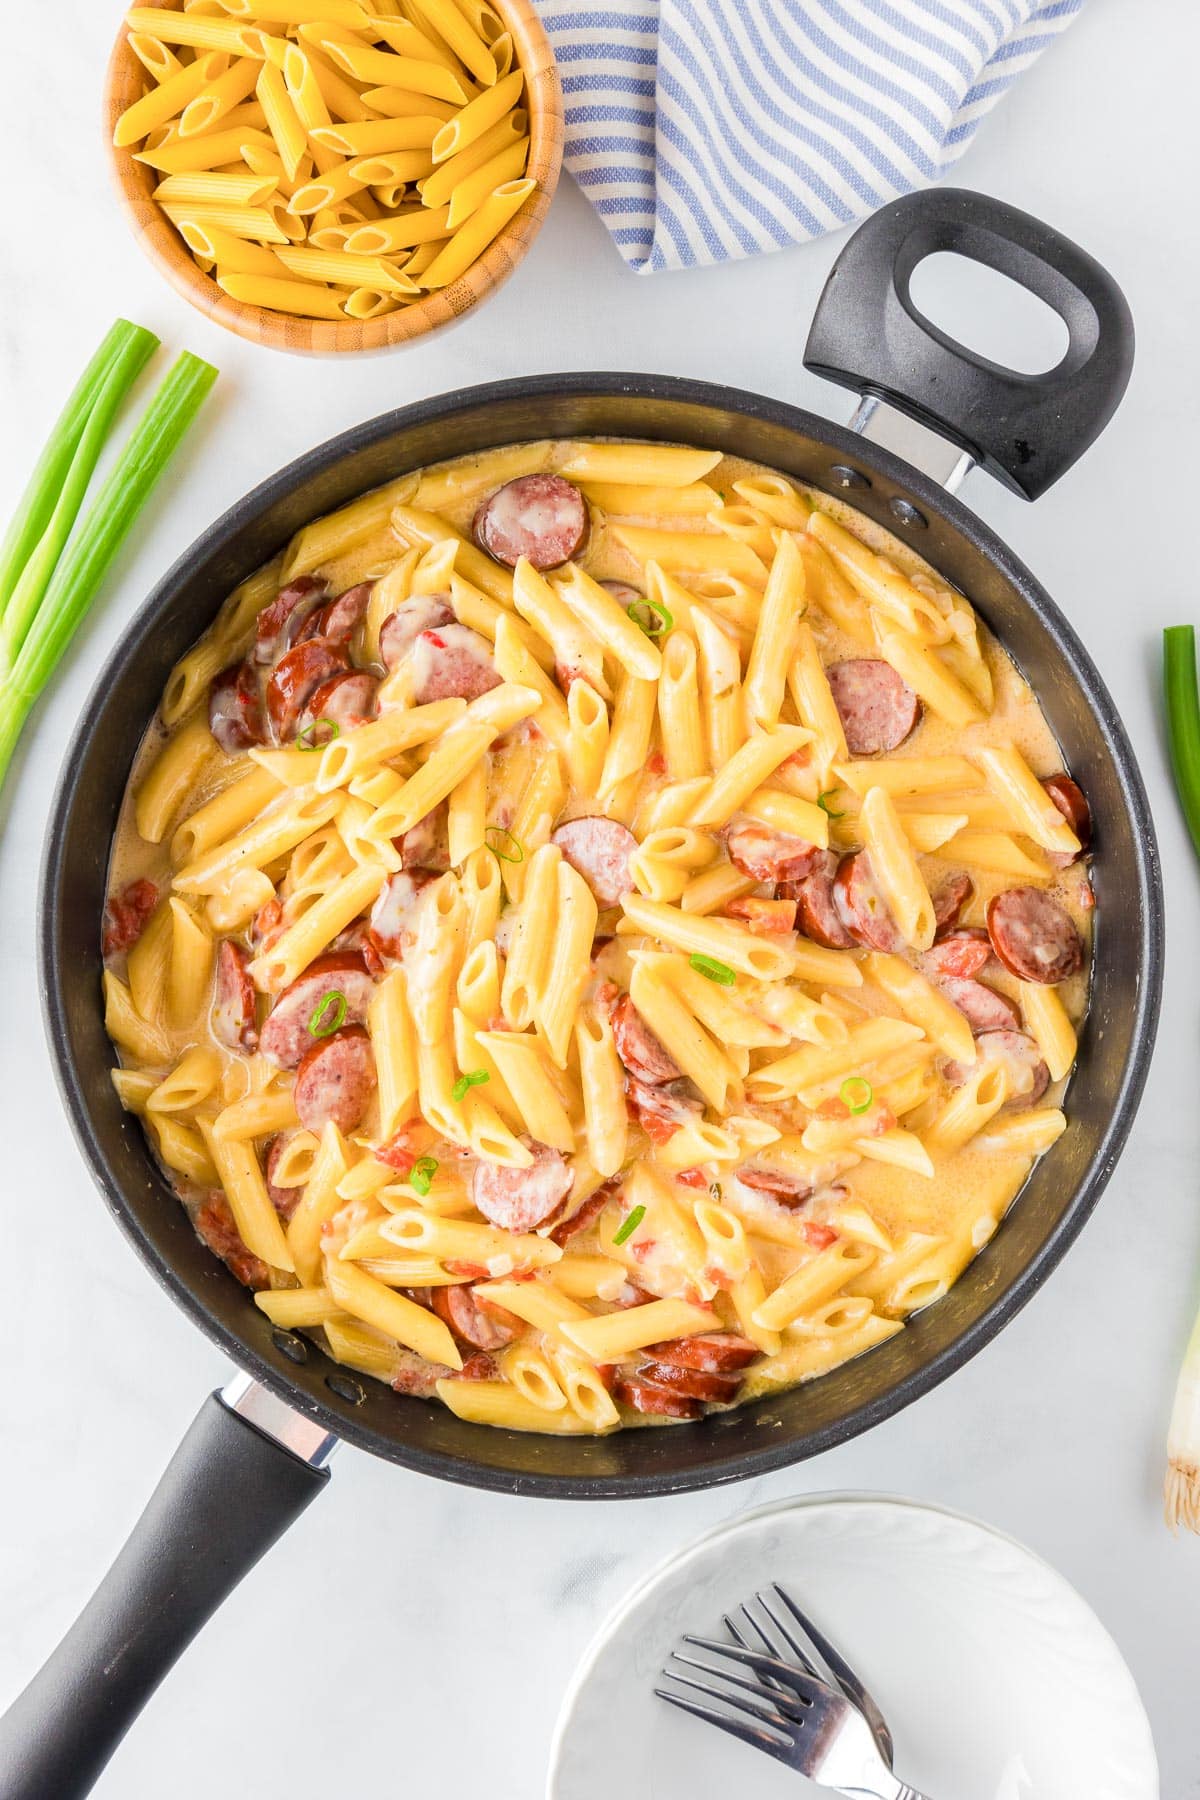 A skillet with creamy cheesy smoked sausage pasta with a bowl with forks, green onion and pasta in a bowl nearby.